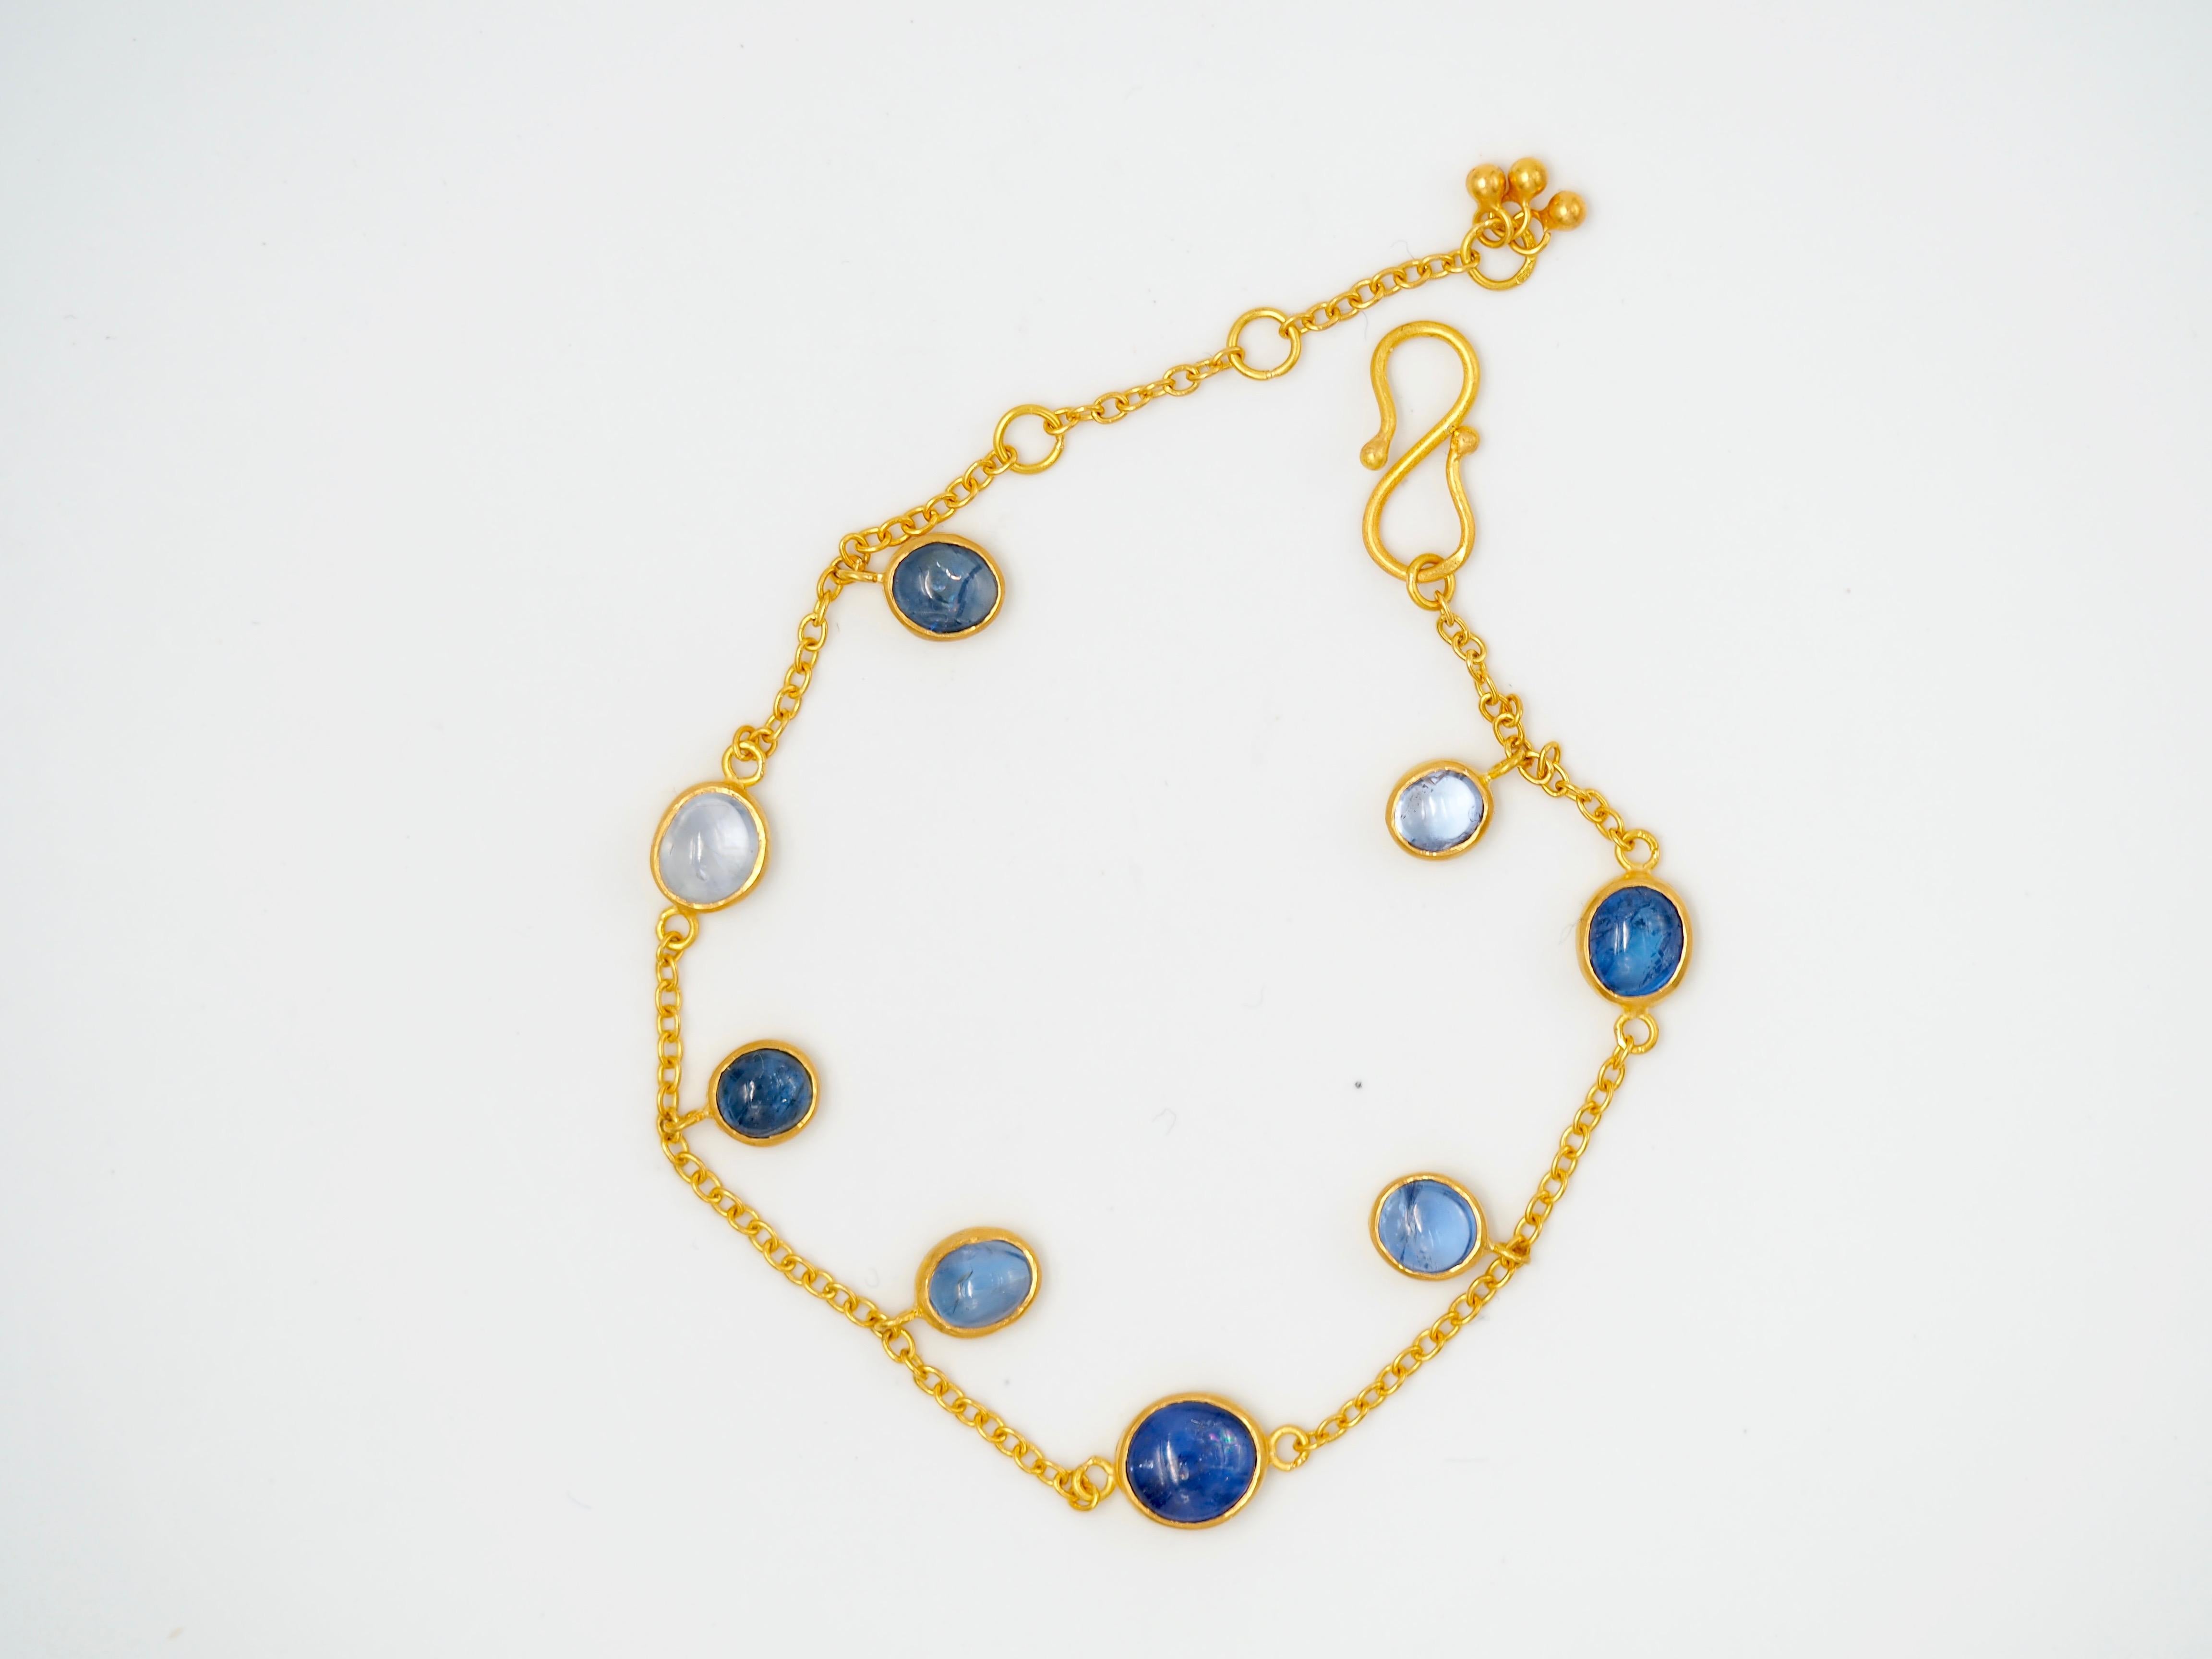 On this bracelet by Scrives, 8 natural blue sapphire cabochons are simply set with a closed gold culet. The total weight of sapphires is 6.98cts. They are natural, unheated sapphires from Myanmar.
Three stones are fixed on a fine gold chain and 5